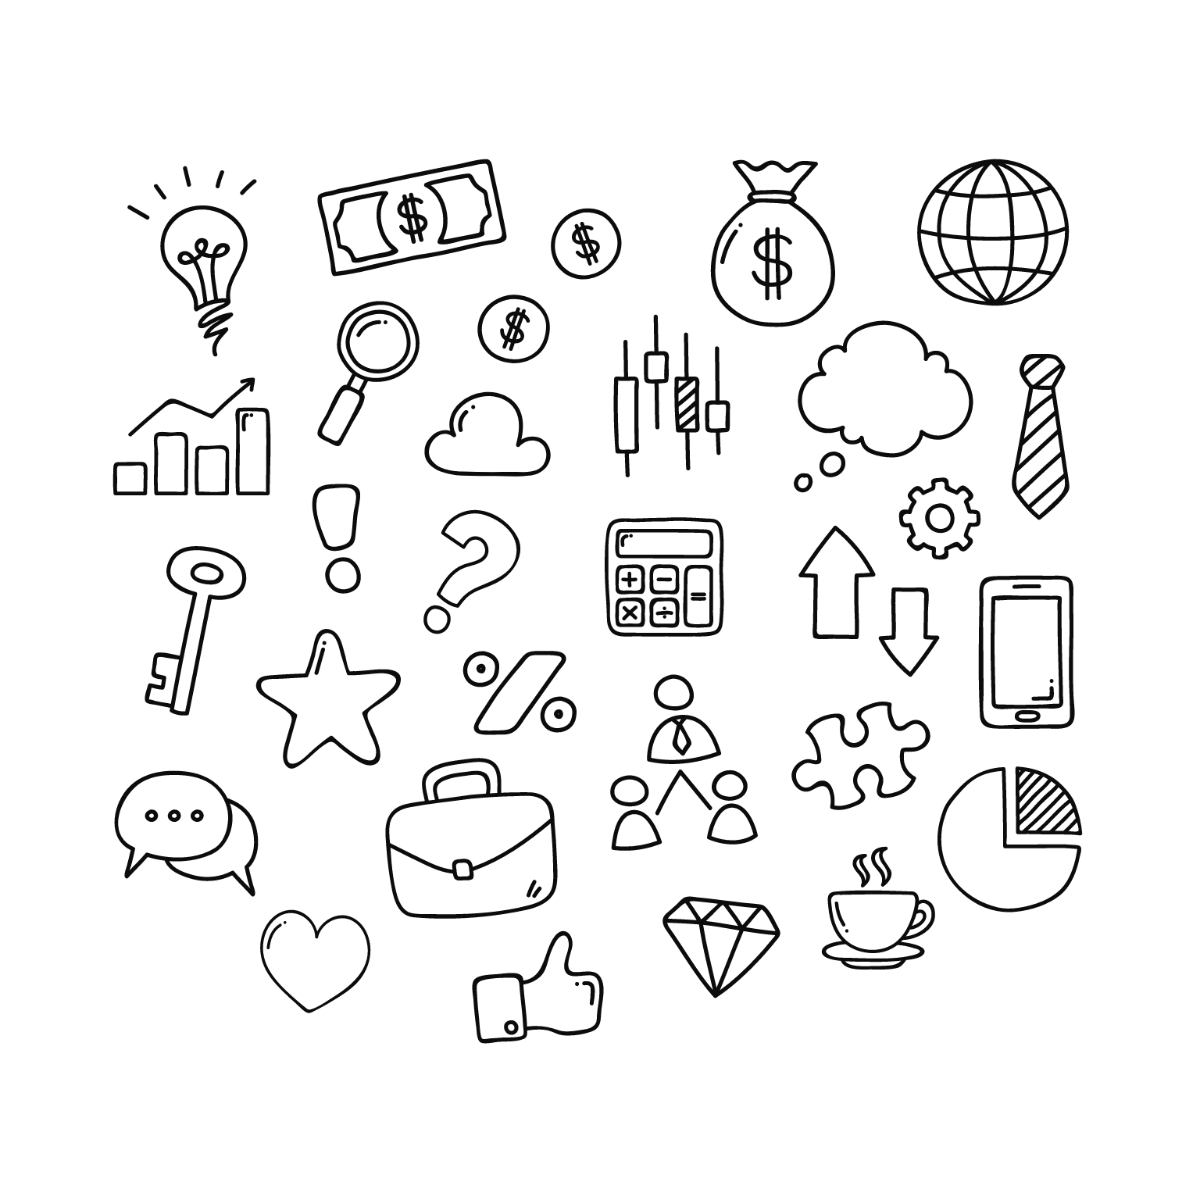 Free Business Doodle Vector Template